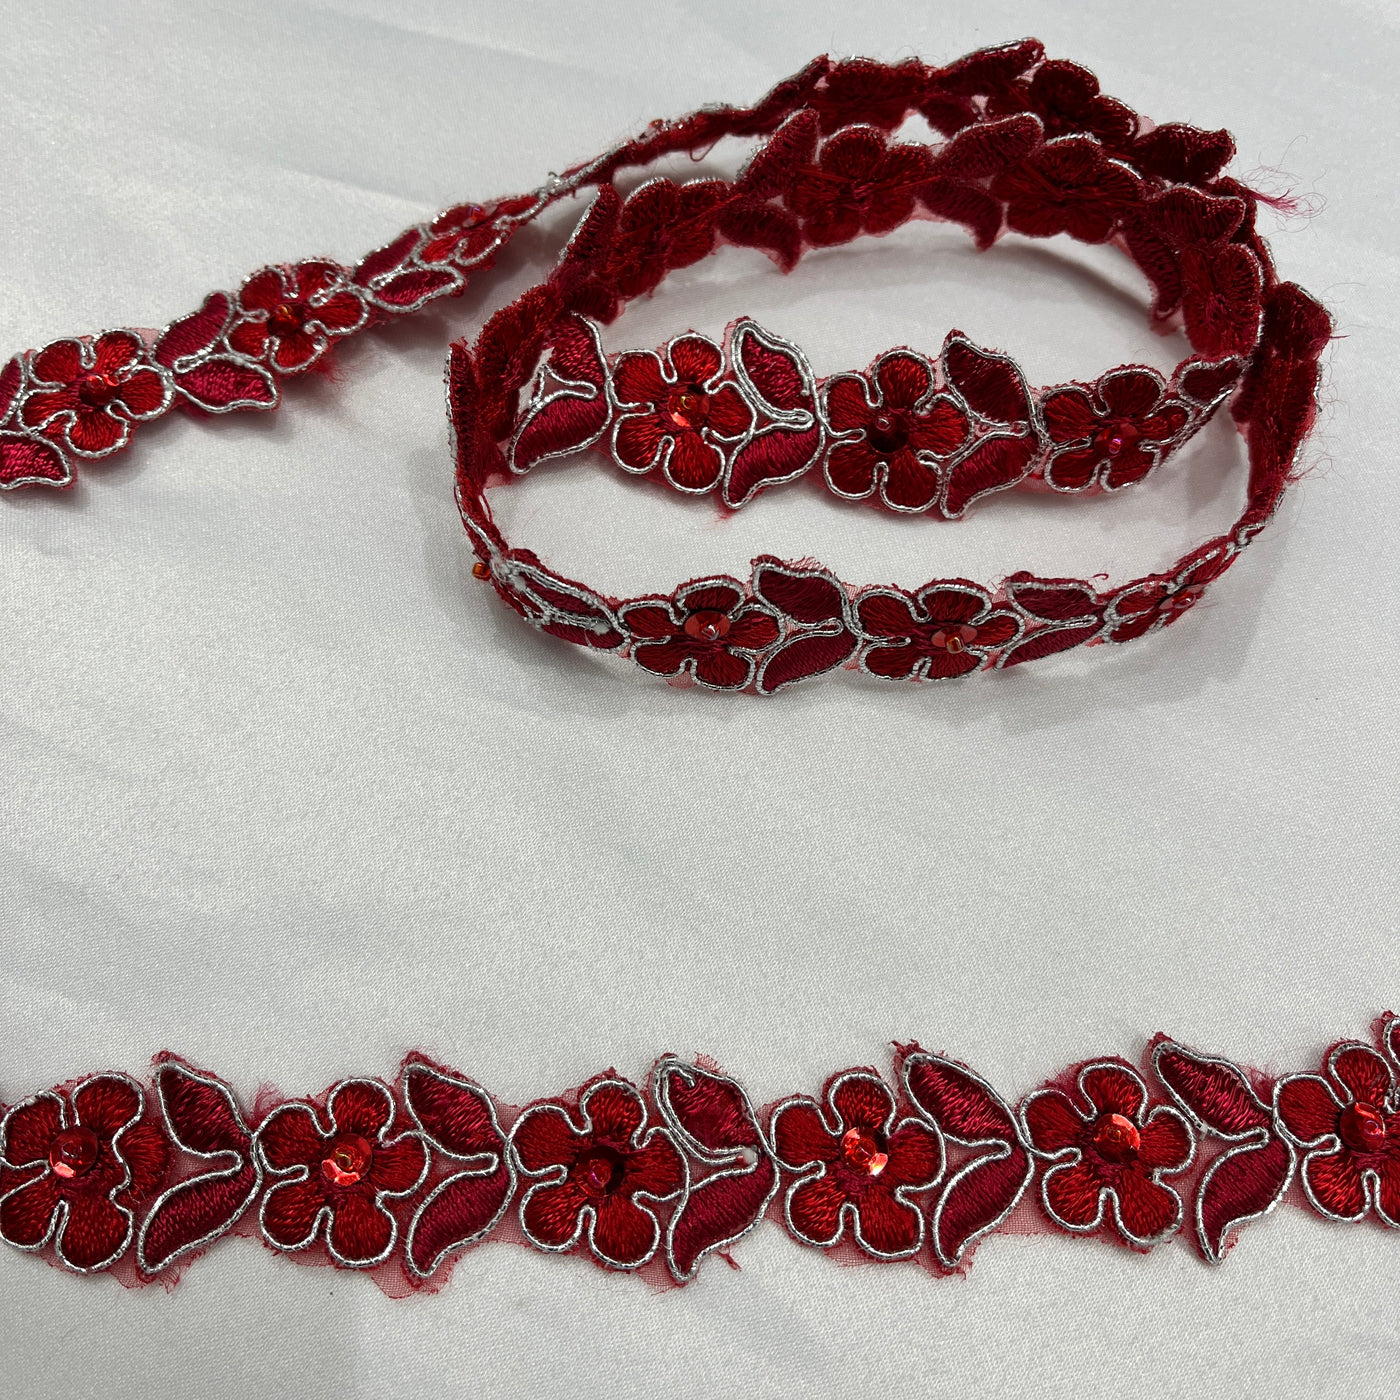 Corded, Beaded & Embroidered Red/silver cord Trimming. Lace Usa